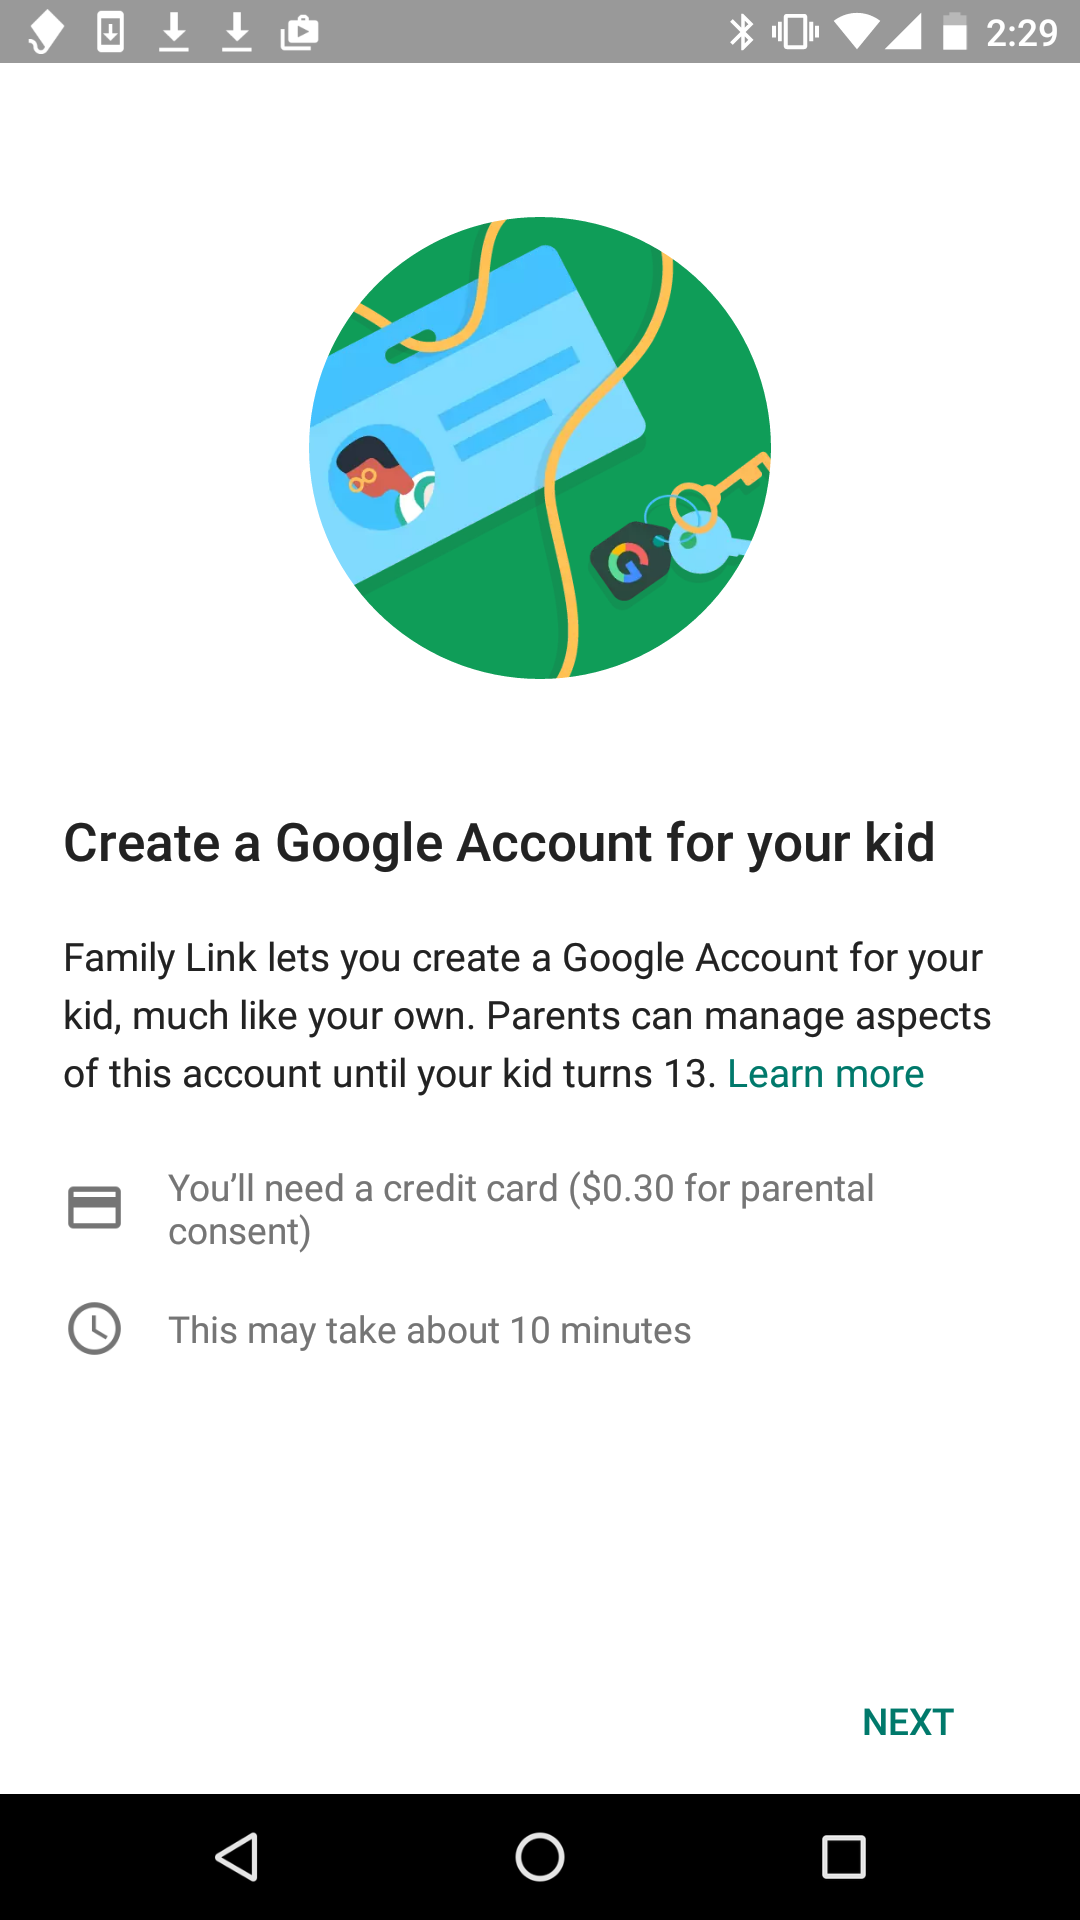 Creating Google accounts for your kids is straightforward, but is intentionally not a fast process. You should set aside time to sit down with your kid when you do it.